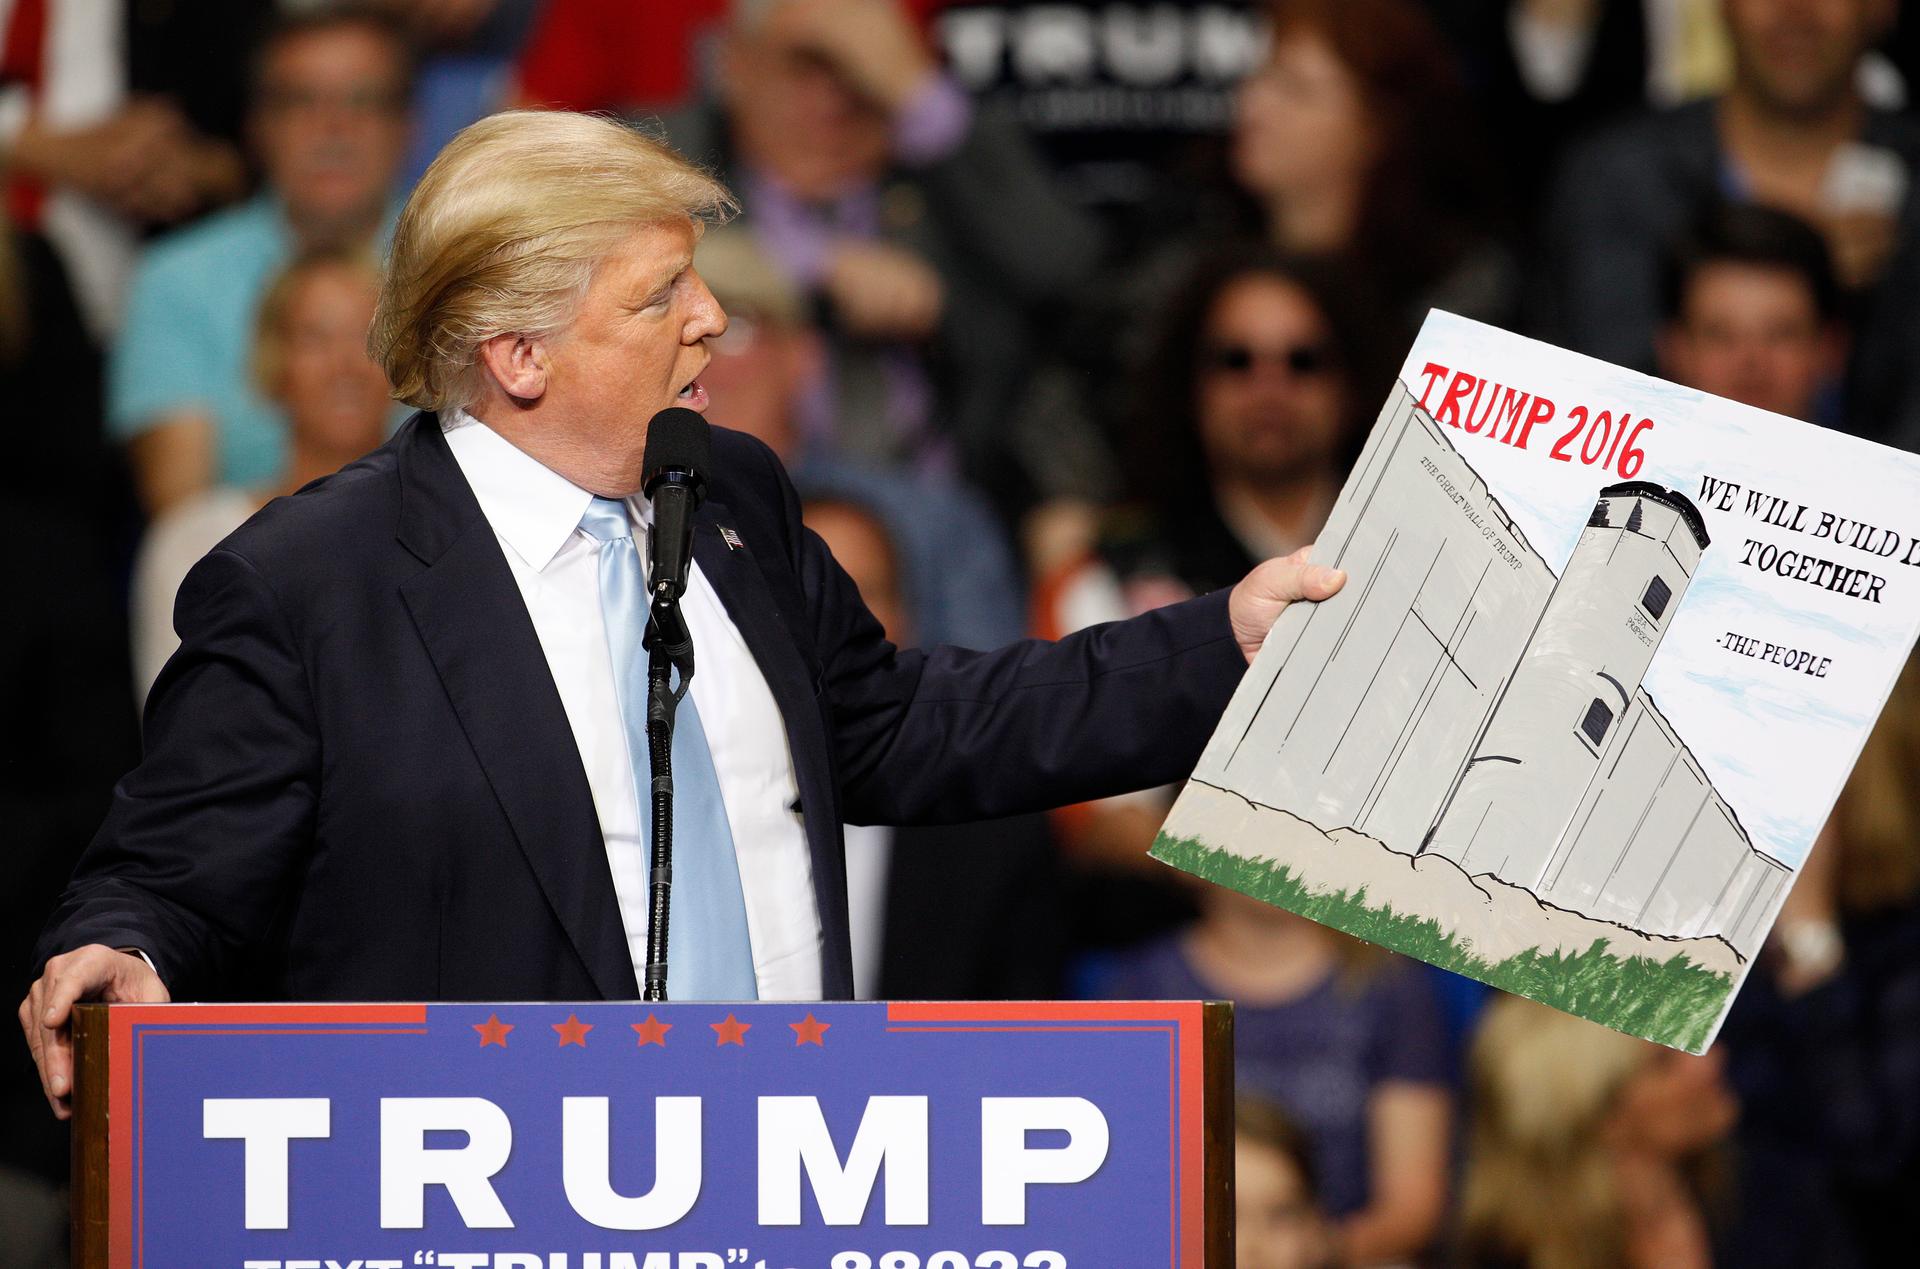 Donald Trump holds a sign supporting his plan to build a wall